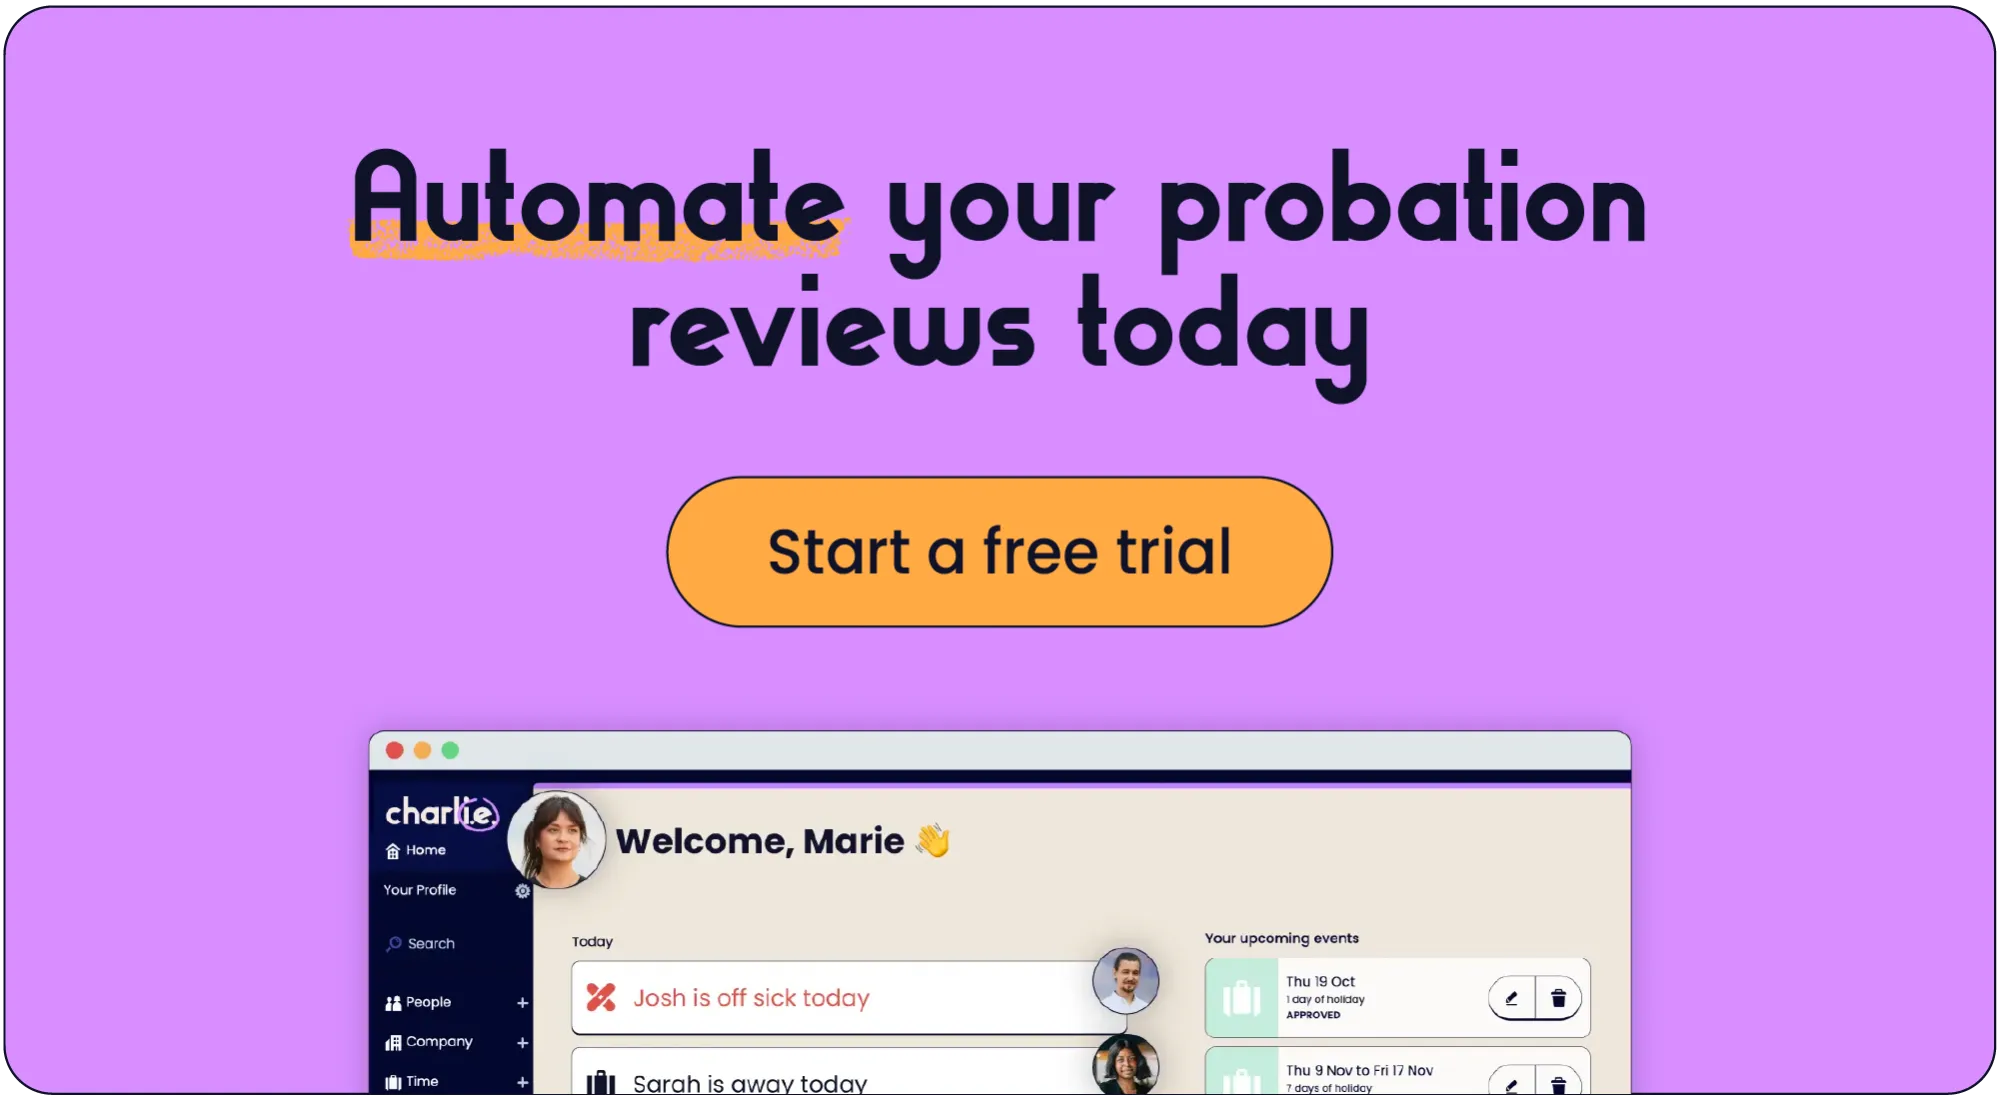 Click here to start a free trial